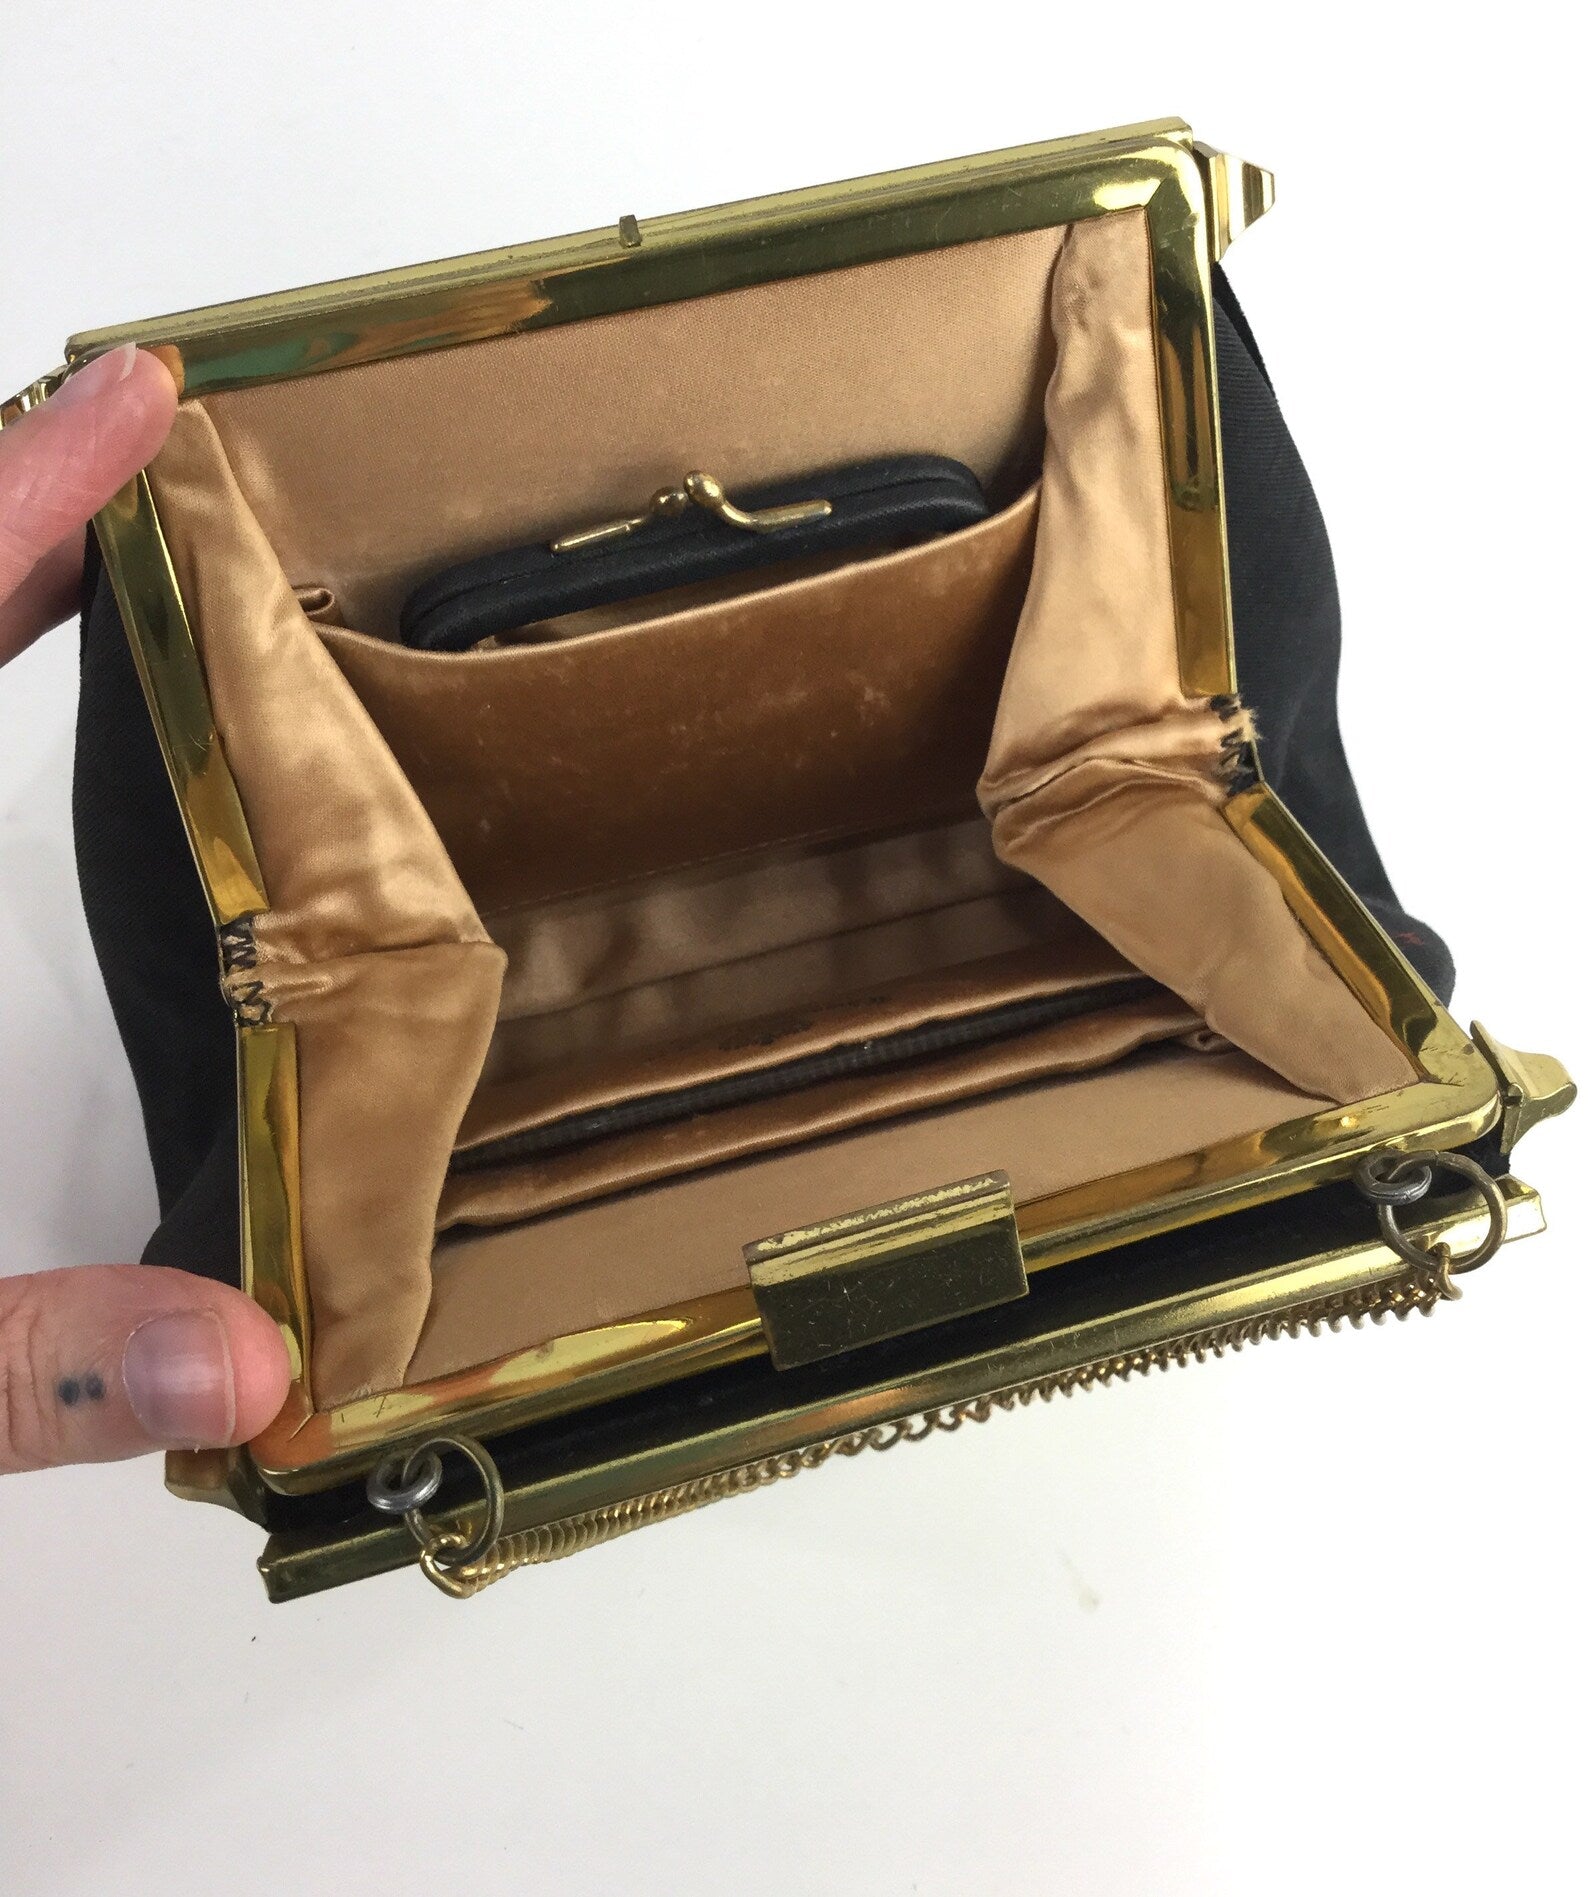 Toronto man finds vintage Louis Vuitton suitcase in grandmother's home